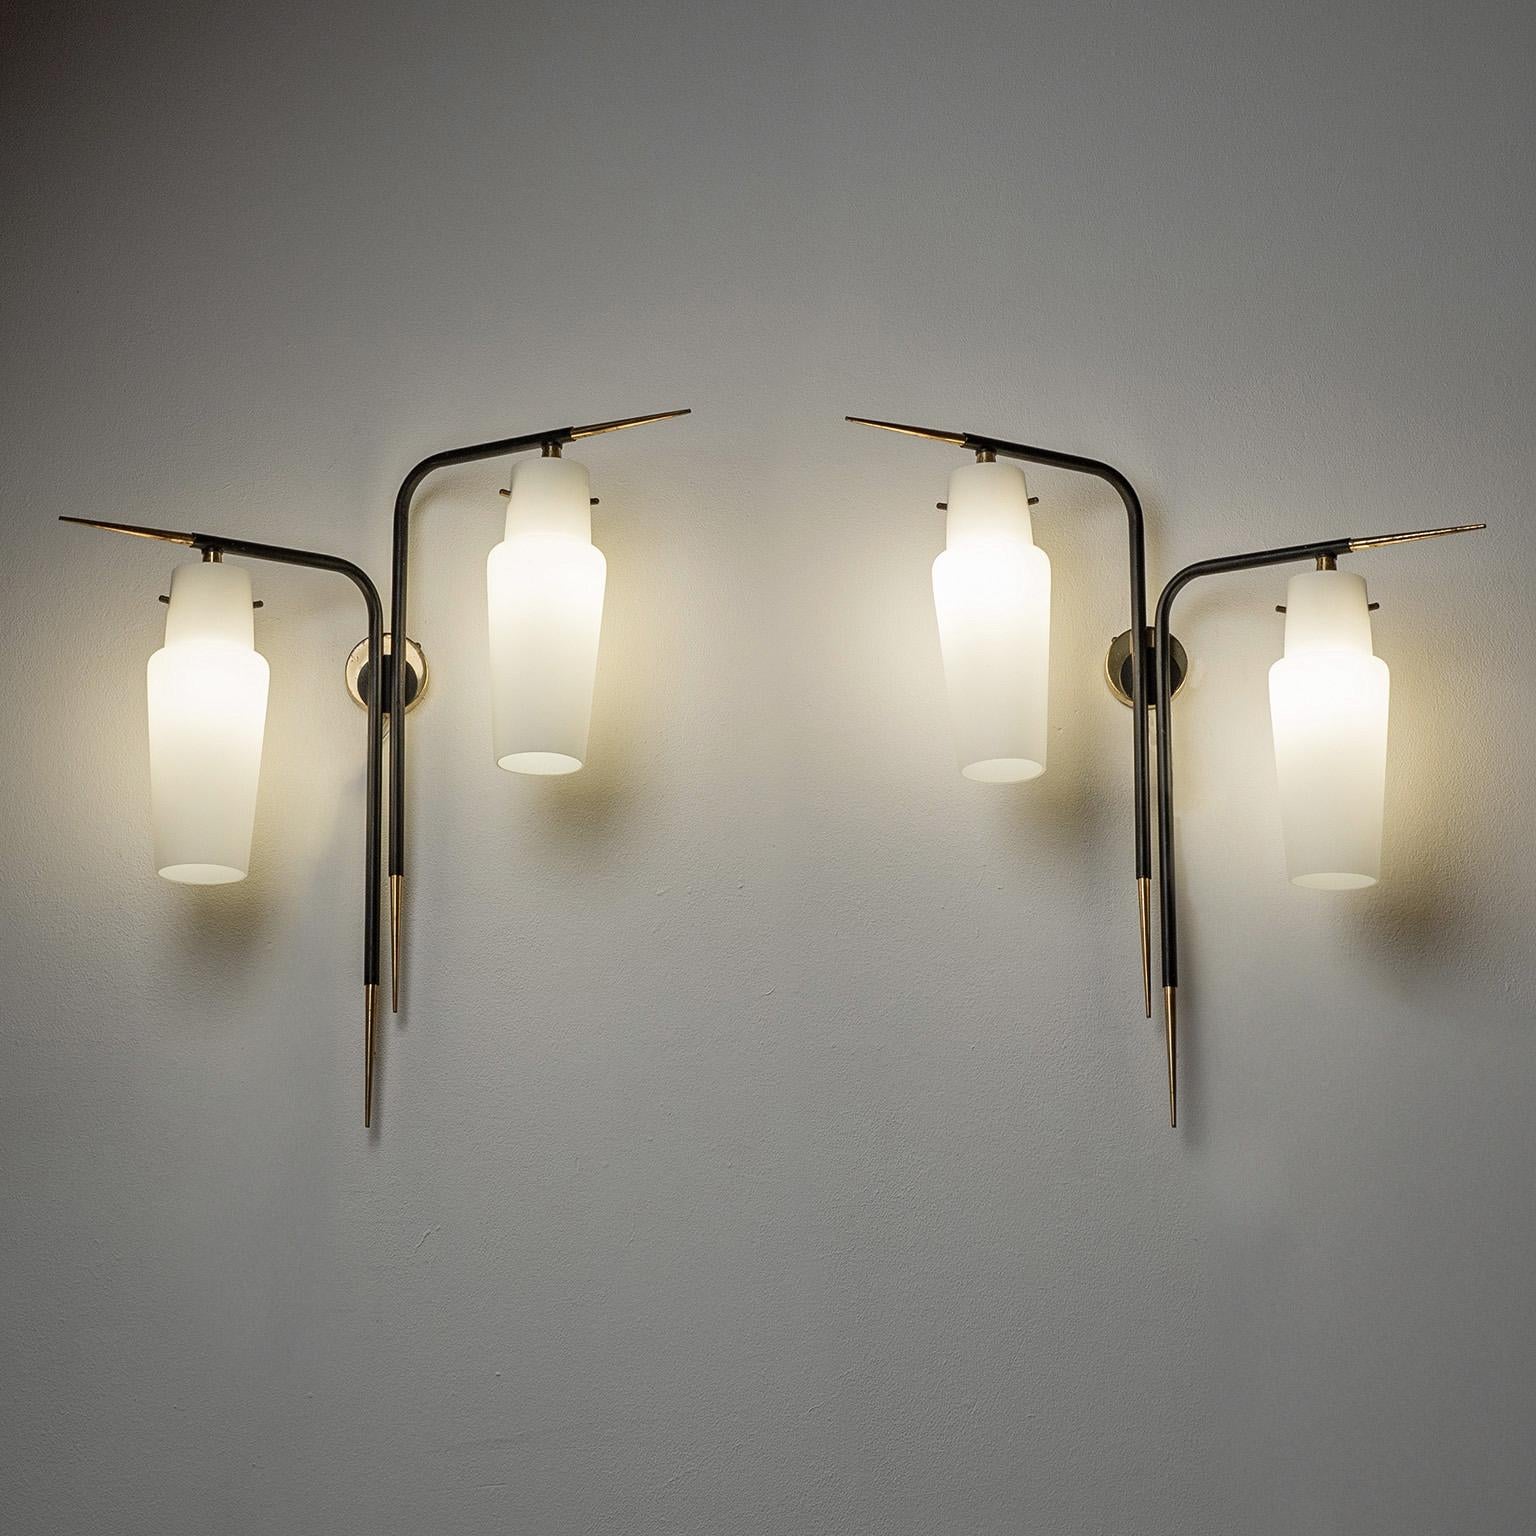 Pair of Large French Modernist Wall Lights, 1950s For Sale 7